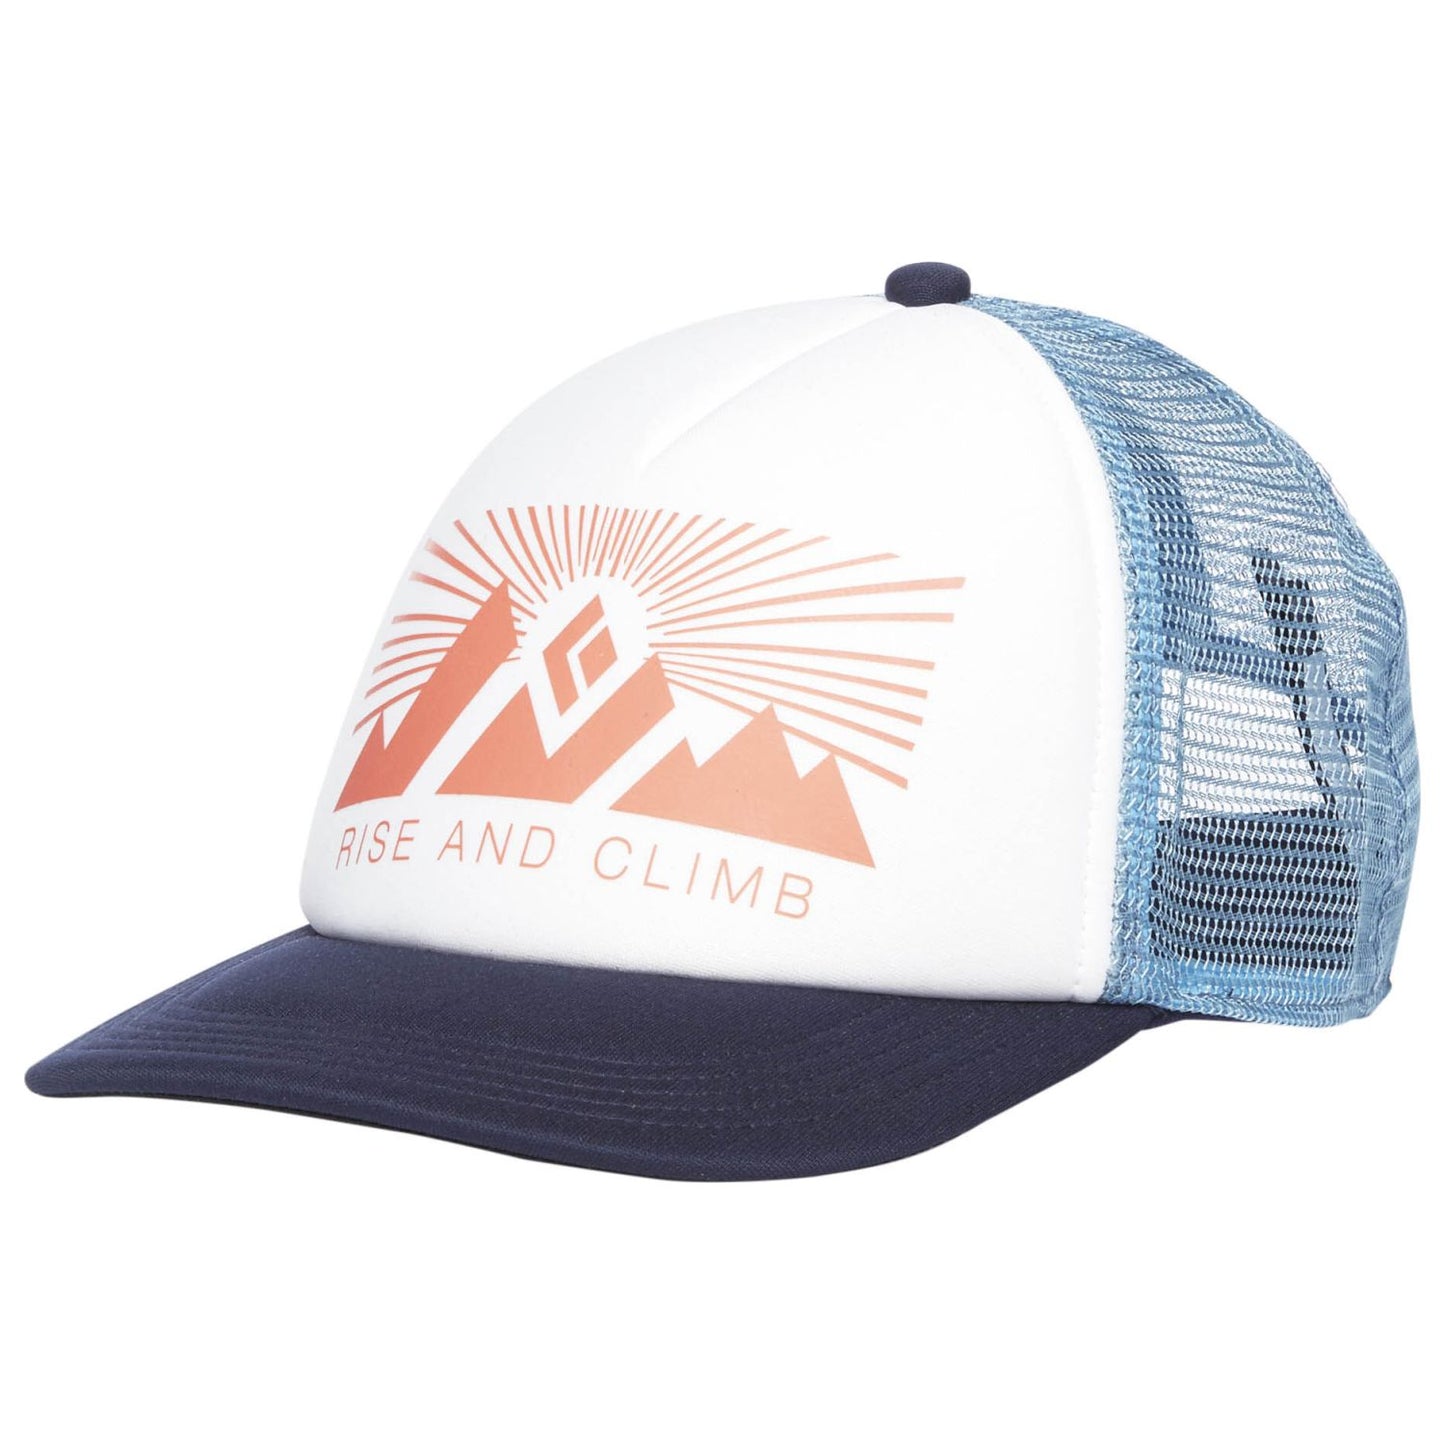 Blue brim trucker hat with white front and red Rise and Climb logo.